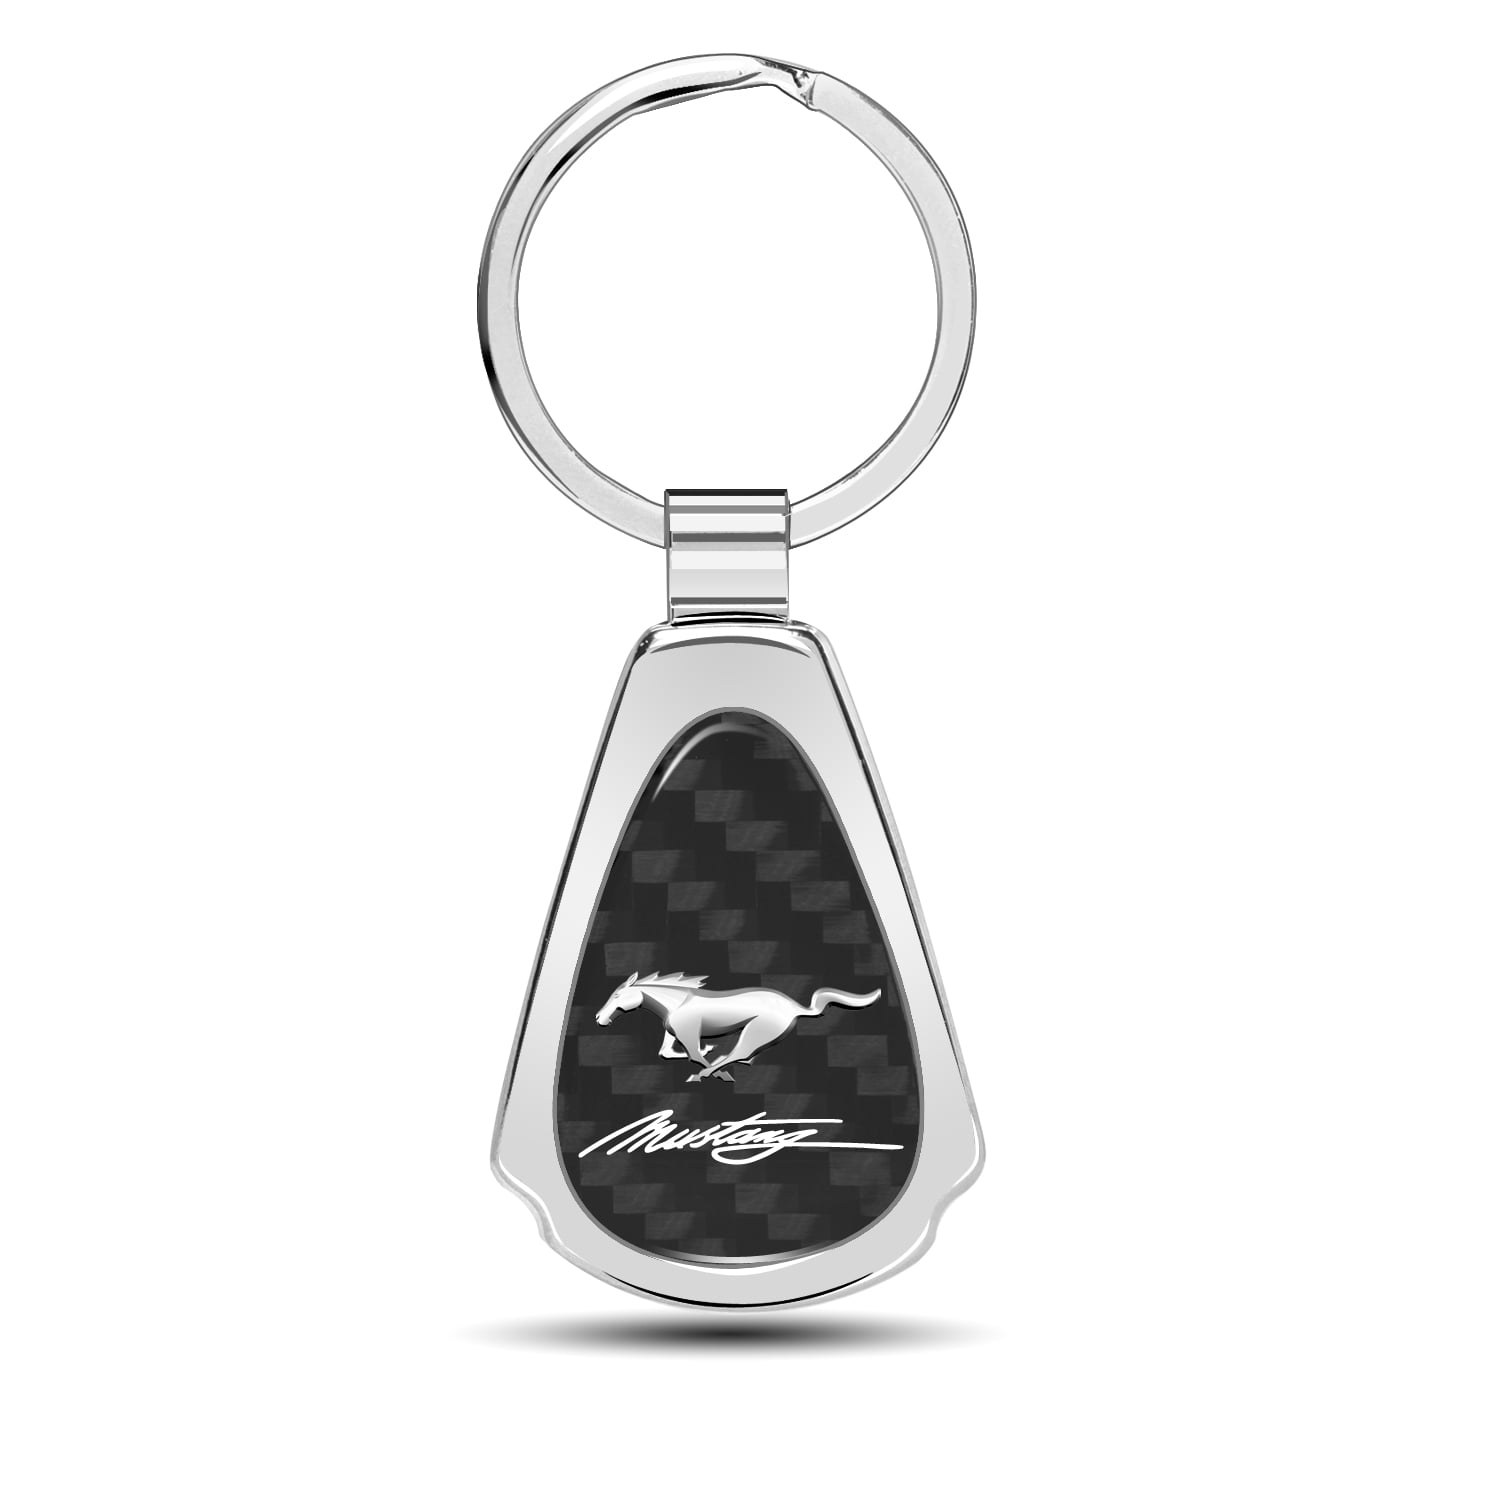 S3 Mercedes Benz Teardrop Car Logo Metal Keyring key chain Fob with Gift Pouch 